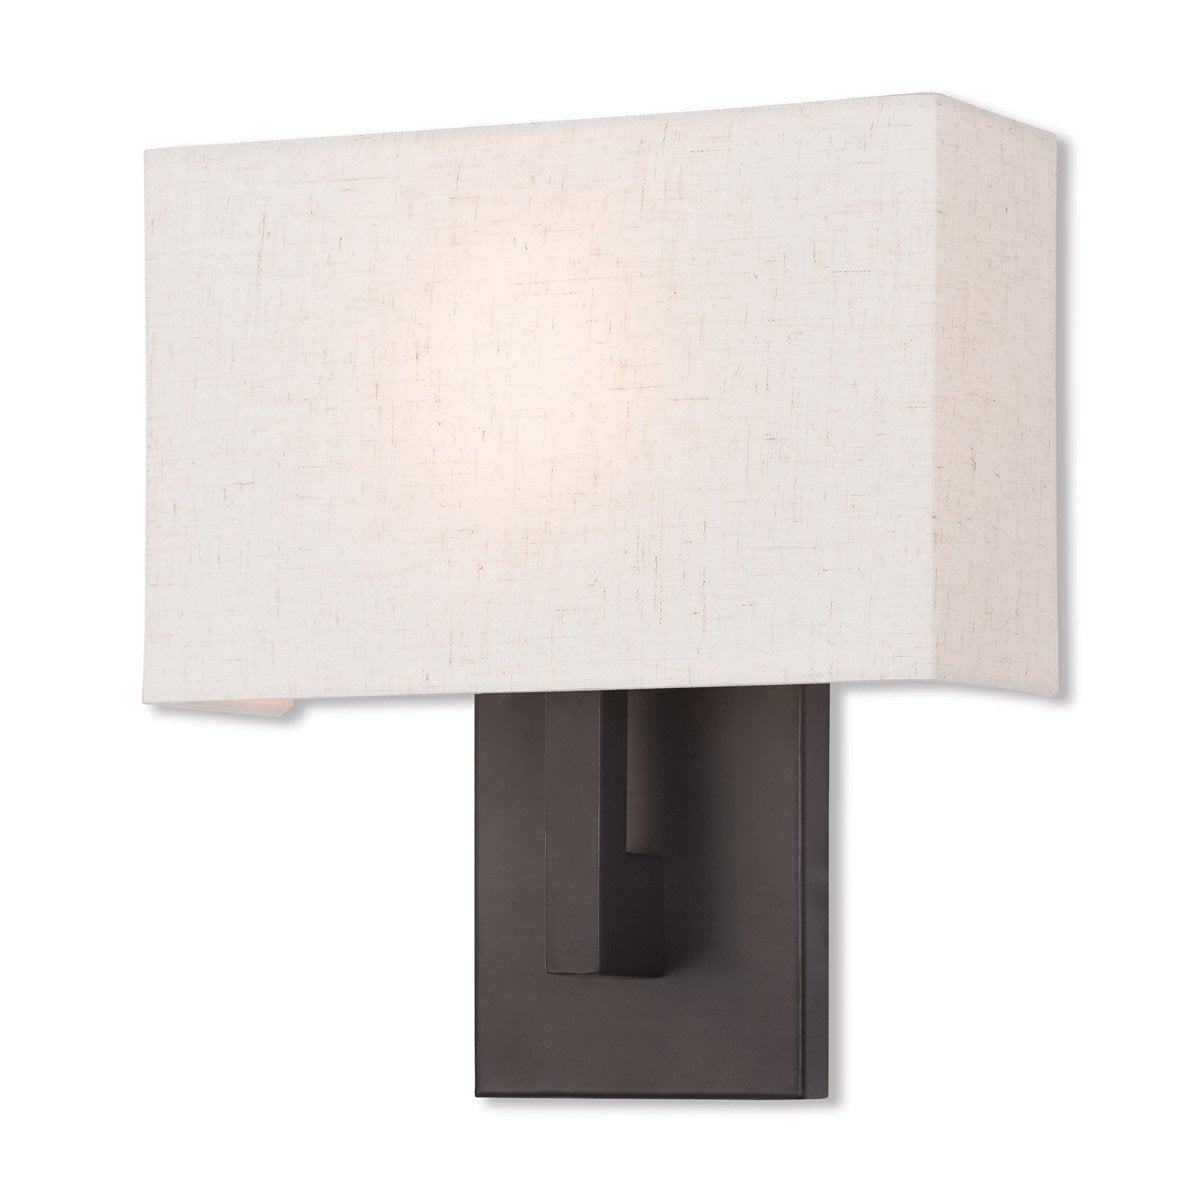 Livex Lighting 42424-07 Transitional One Light Wall Sconce from Hayworth Collection in Bronze/Dark Finish, Medium